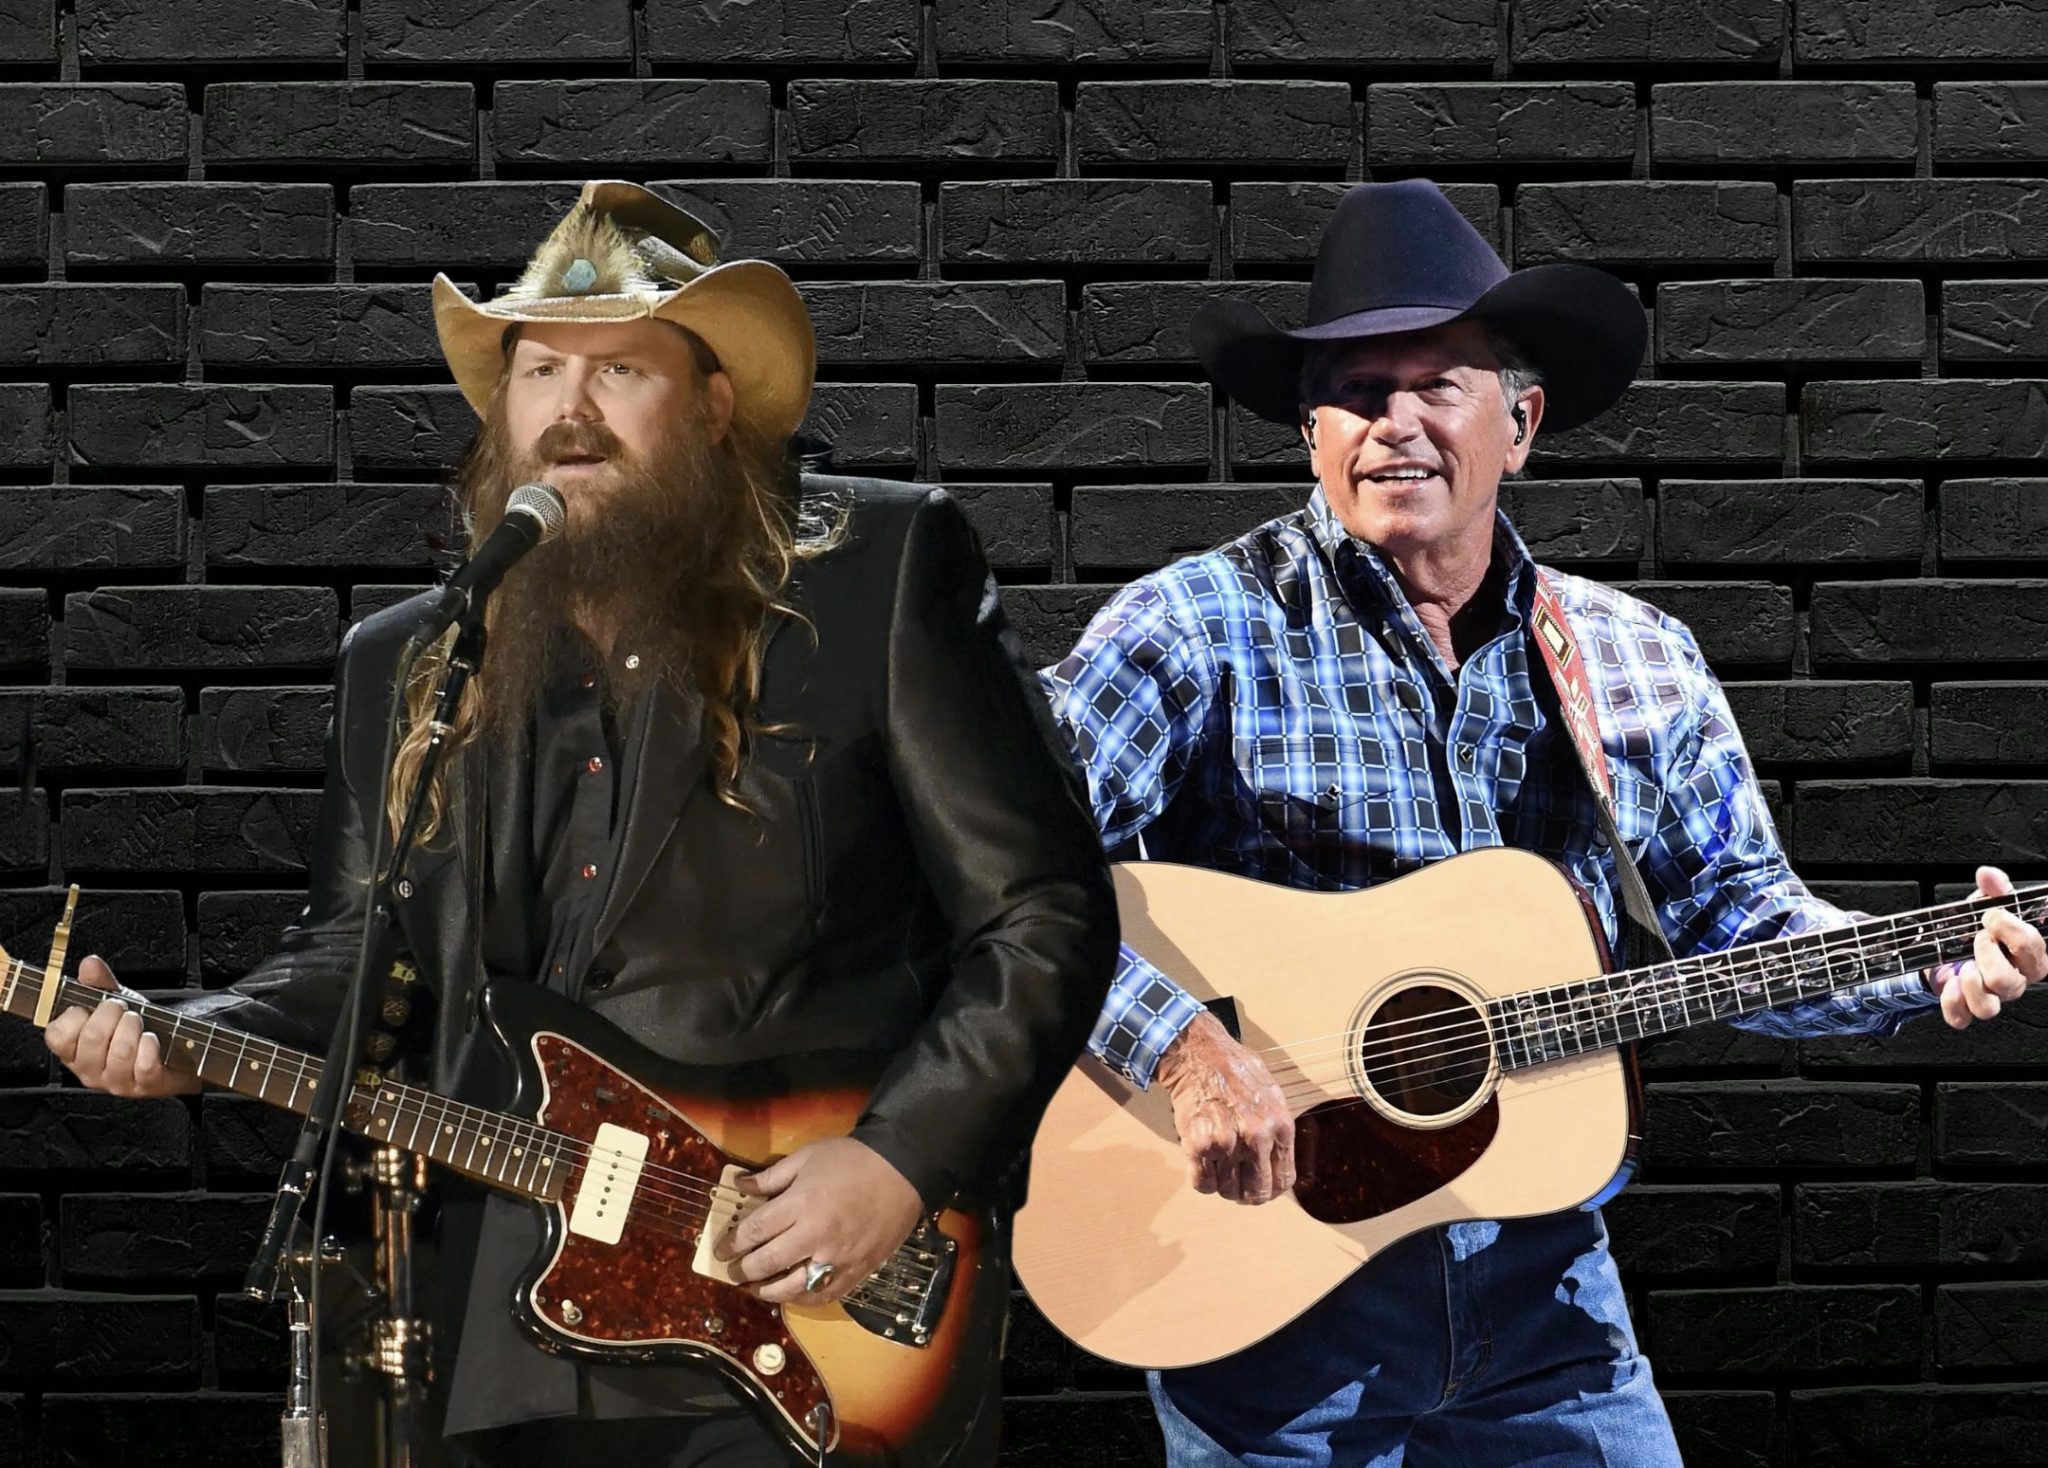 WATCH Chris Stapleton and Strait Perform "When Did You Stop